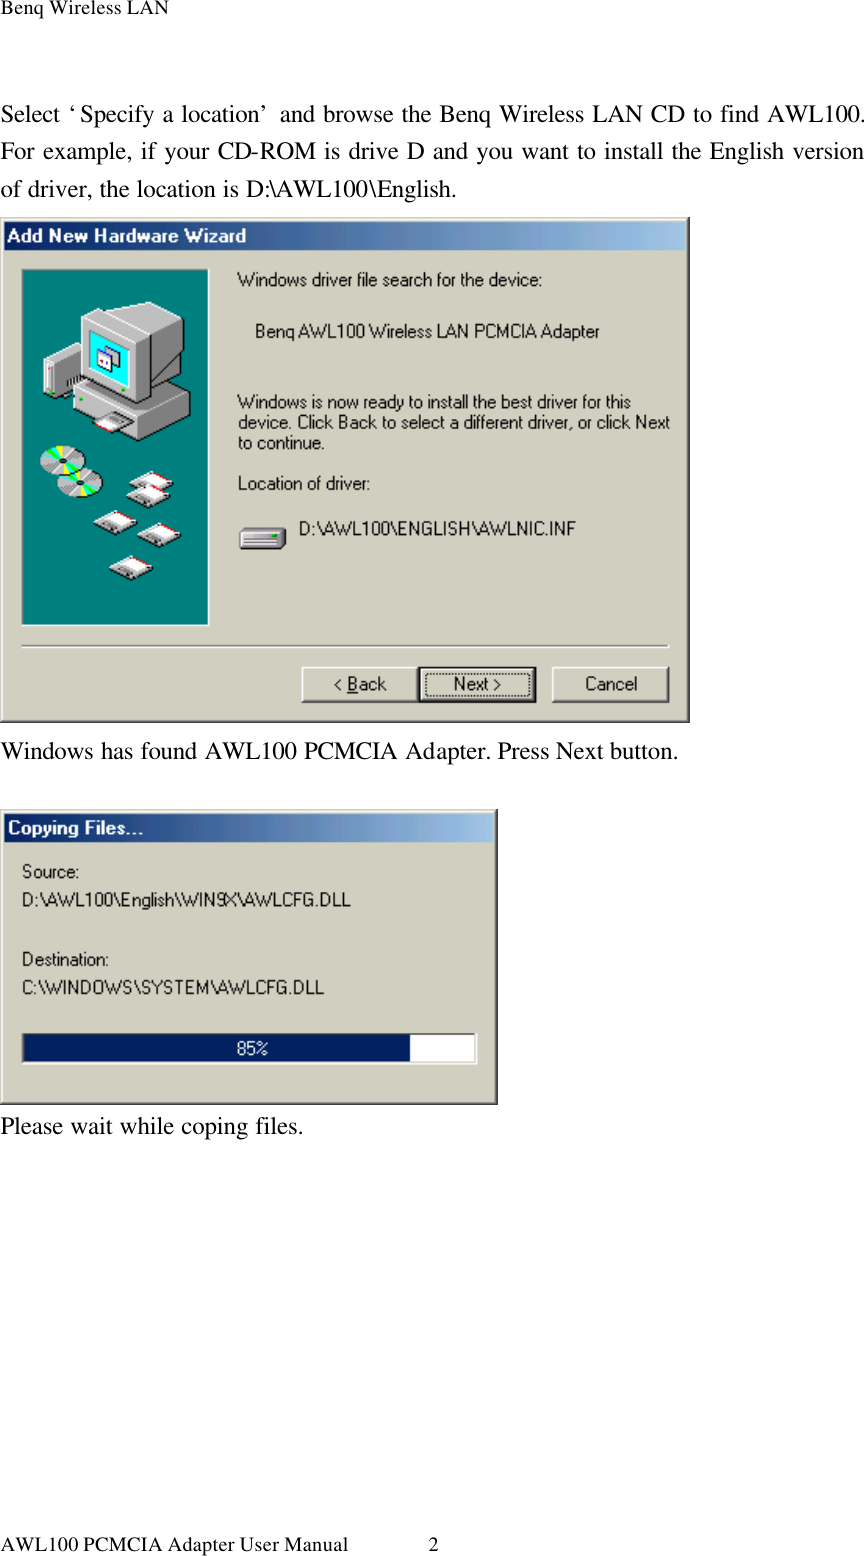 Benq Wireless LAN AWL100 PCMCIA Adapter User Manual 2 Select ‘Specify a location’ and browse the Benq Wireless LAN CD to find AWL100. For example, if your CD-ROM is drive D and you want to install the English version of driver, the location is D:\AWL100\English.  Windows has found AWL100 PCMCIA Adapter. Press Next button.   Please wait while coping files. 